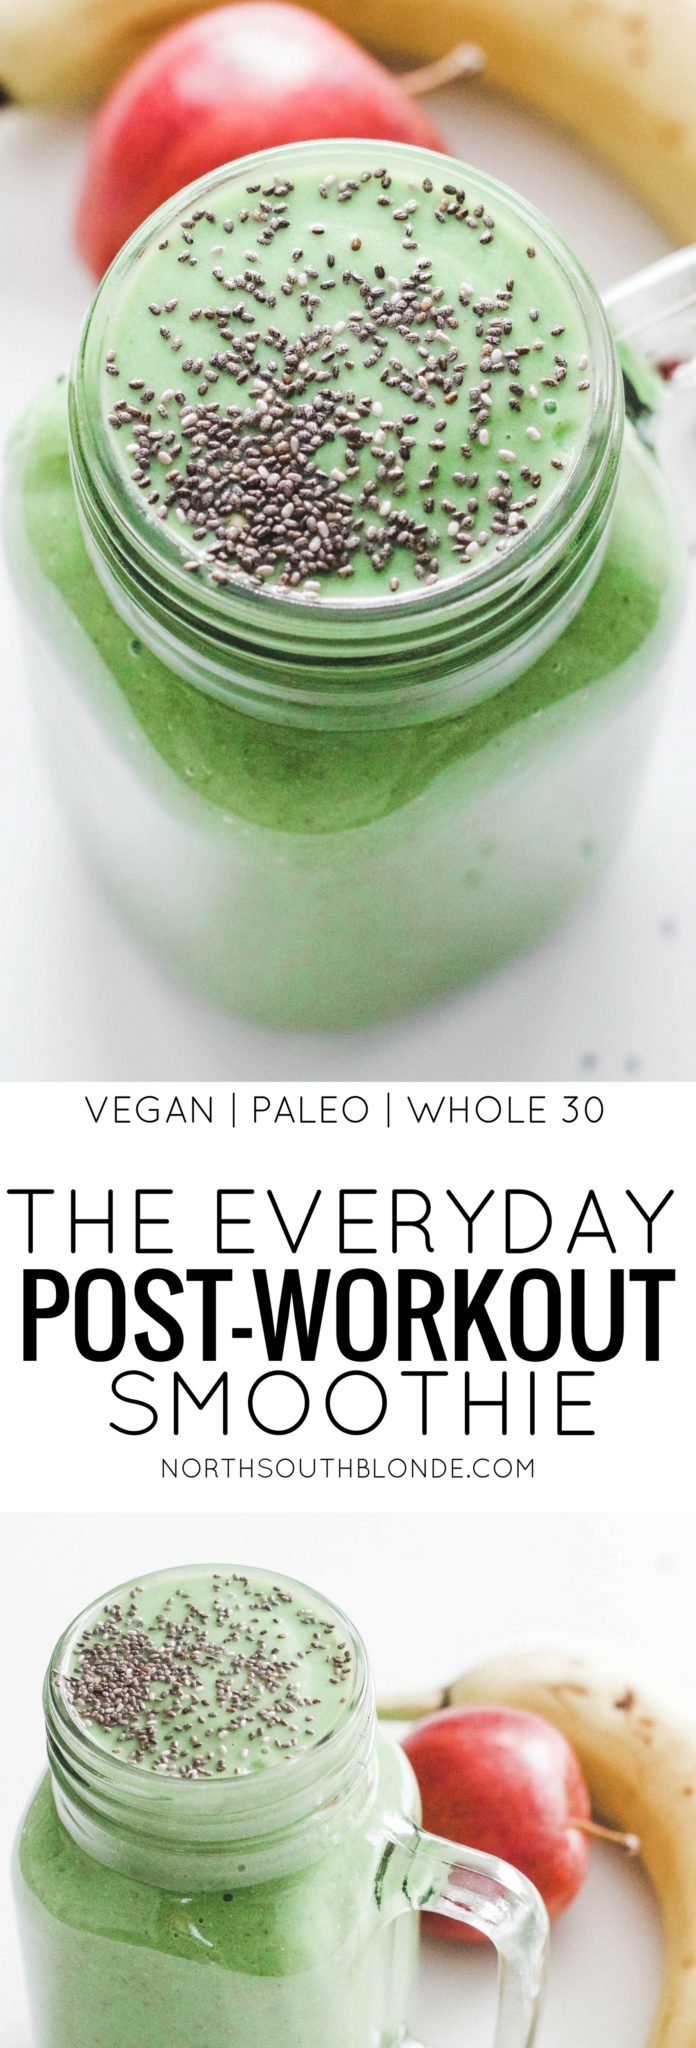 This everyday post-workout smoothie is quick and easy to make on the regular and necessary to better digestion, boost the metabolism, recover after exercise, and aid in weight loss. Green smoothie | Vegan | Whole 30 | Breakfast | Lunch | Meal Replacement | Low carb | Low calorie | Quick and Easy | Fibre | Protein | Fitness | Exercise | Get in Shape | Get Fit | Loose Weight | Detox | Cleanse | Healthy | Nutrition | Good for you | Post Workout | Morning smoothie | Paleo | Super Food | Recovery |